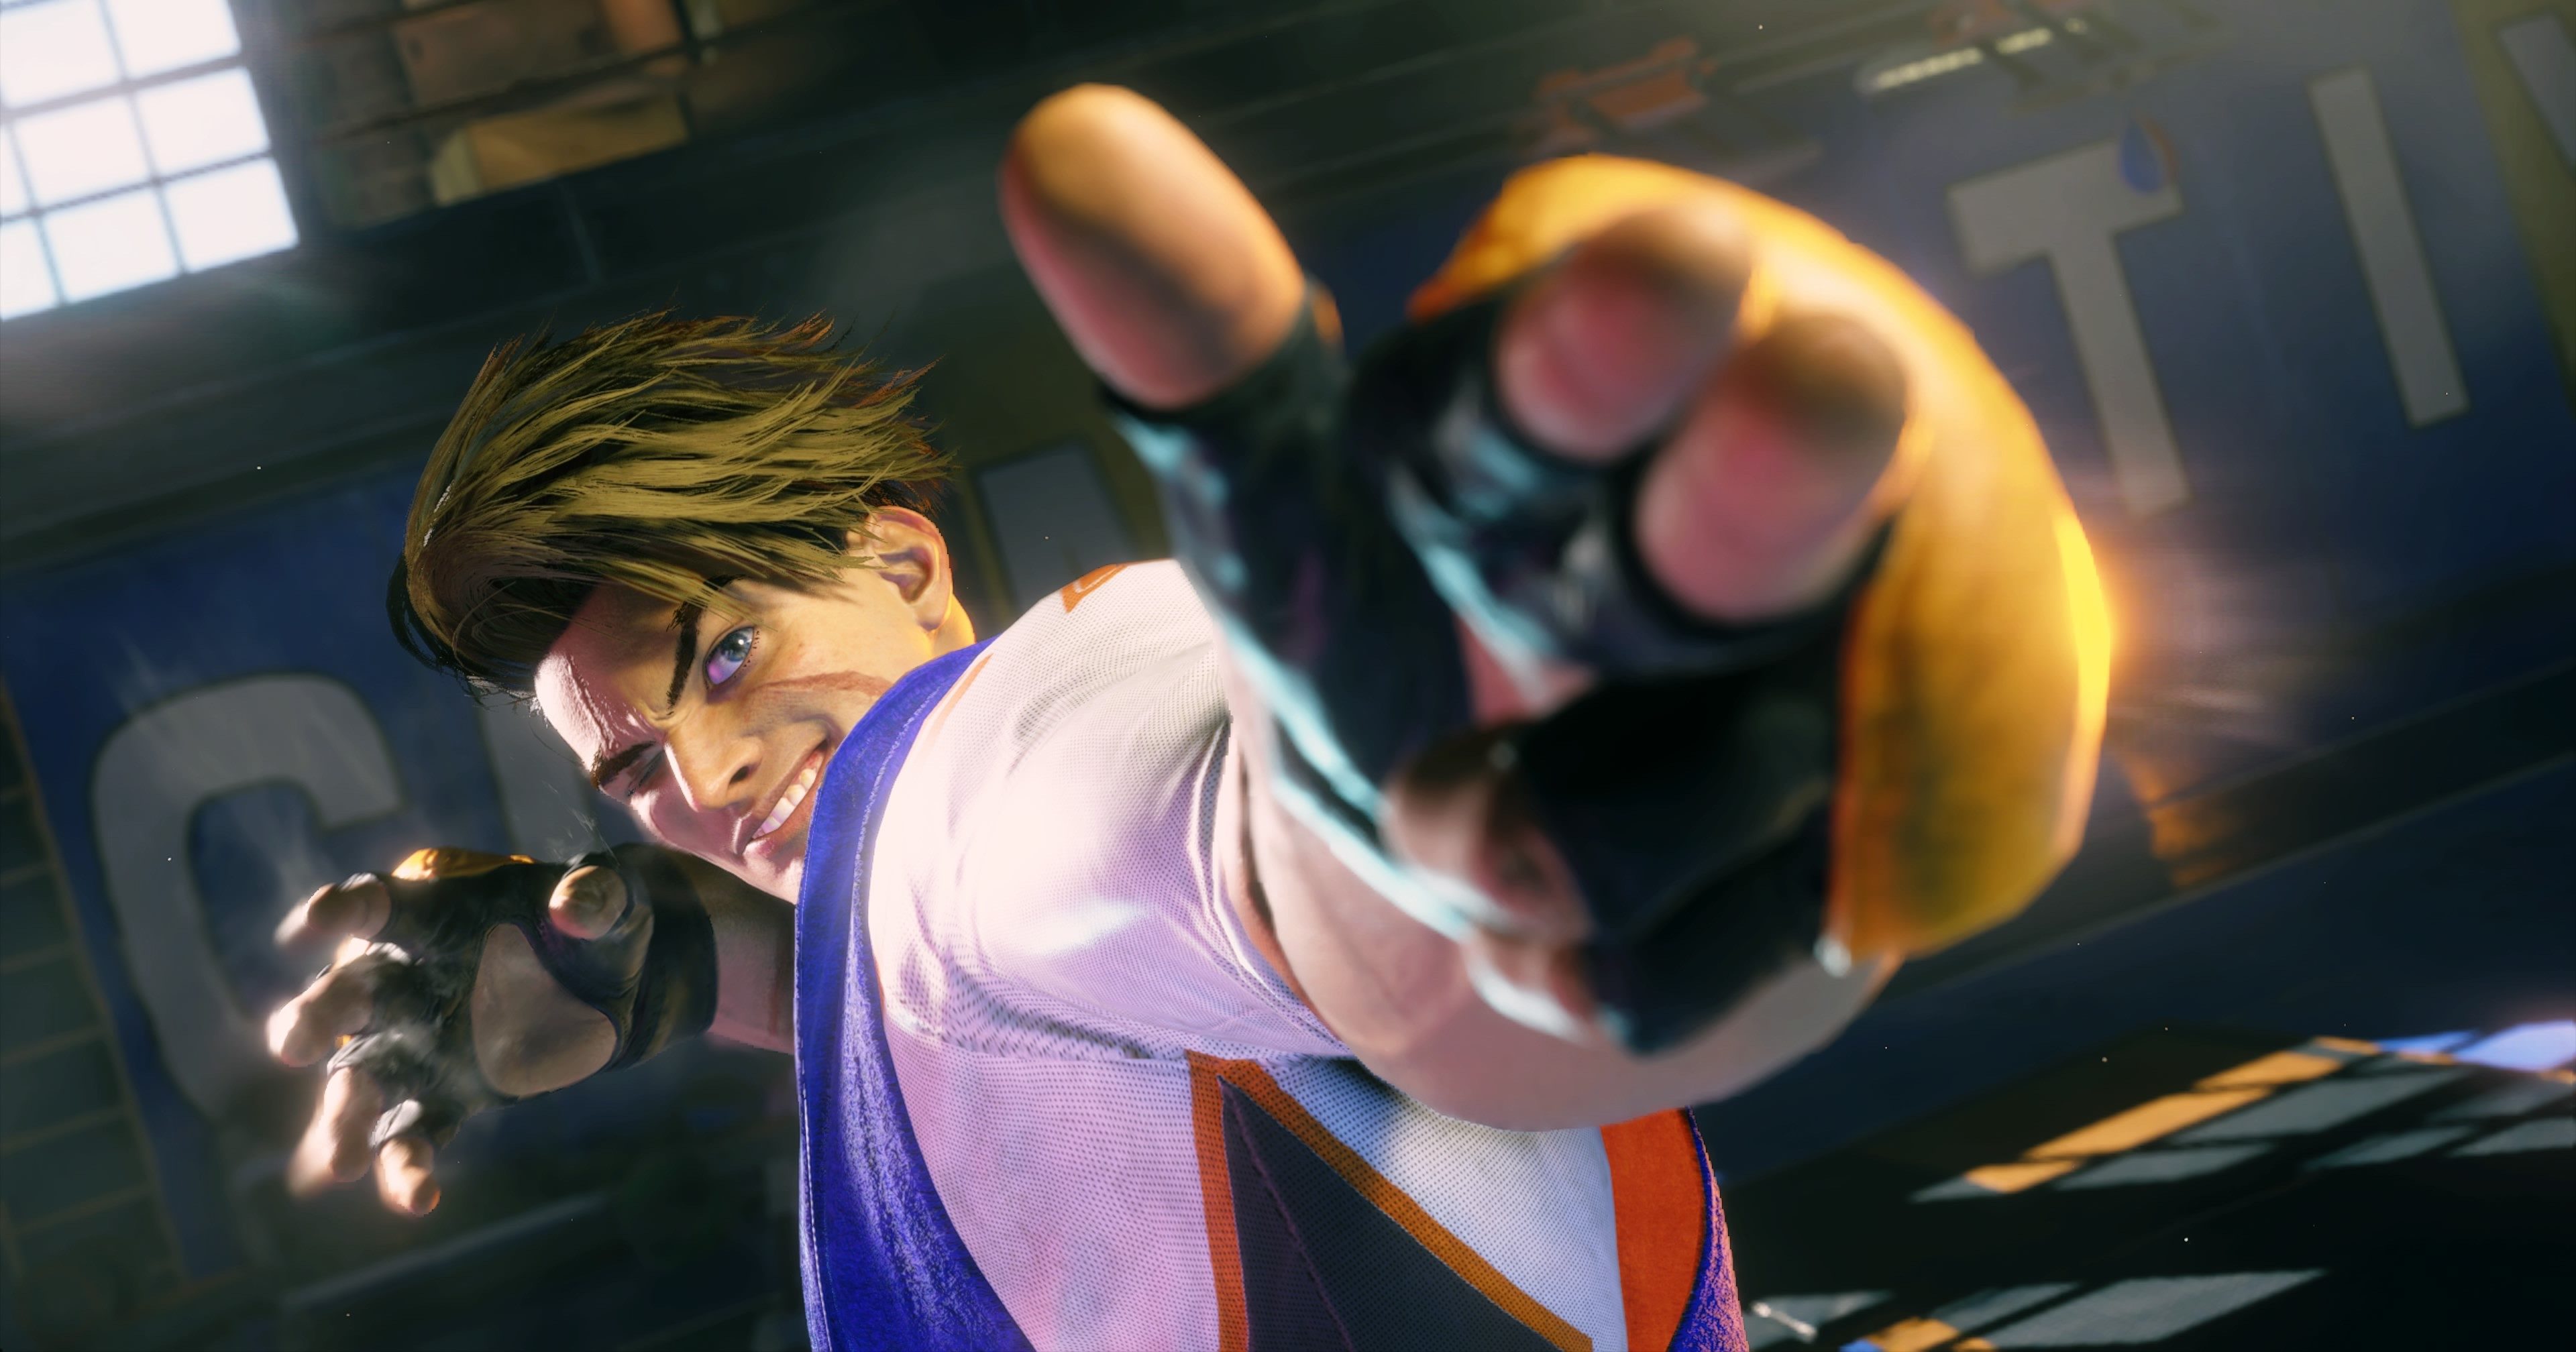 Street Fighter 6' Review: A Bold Knockout